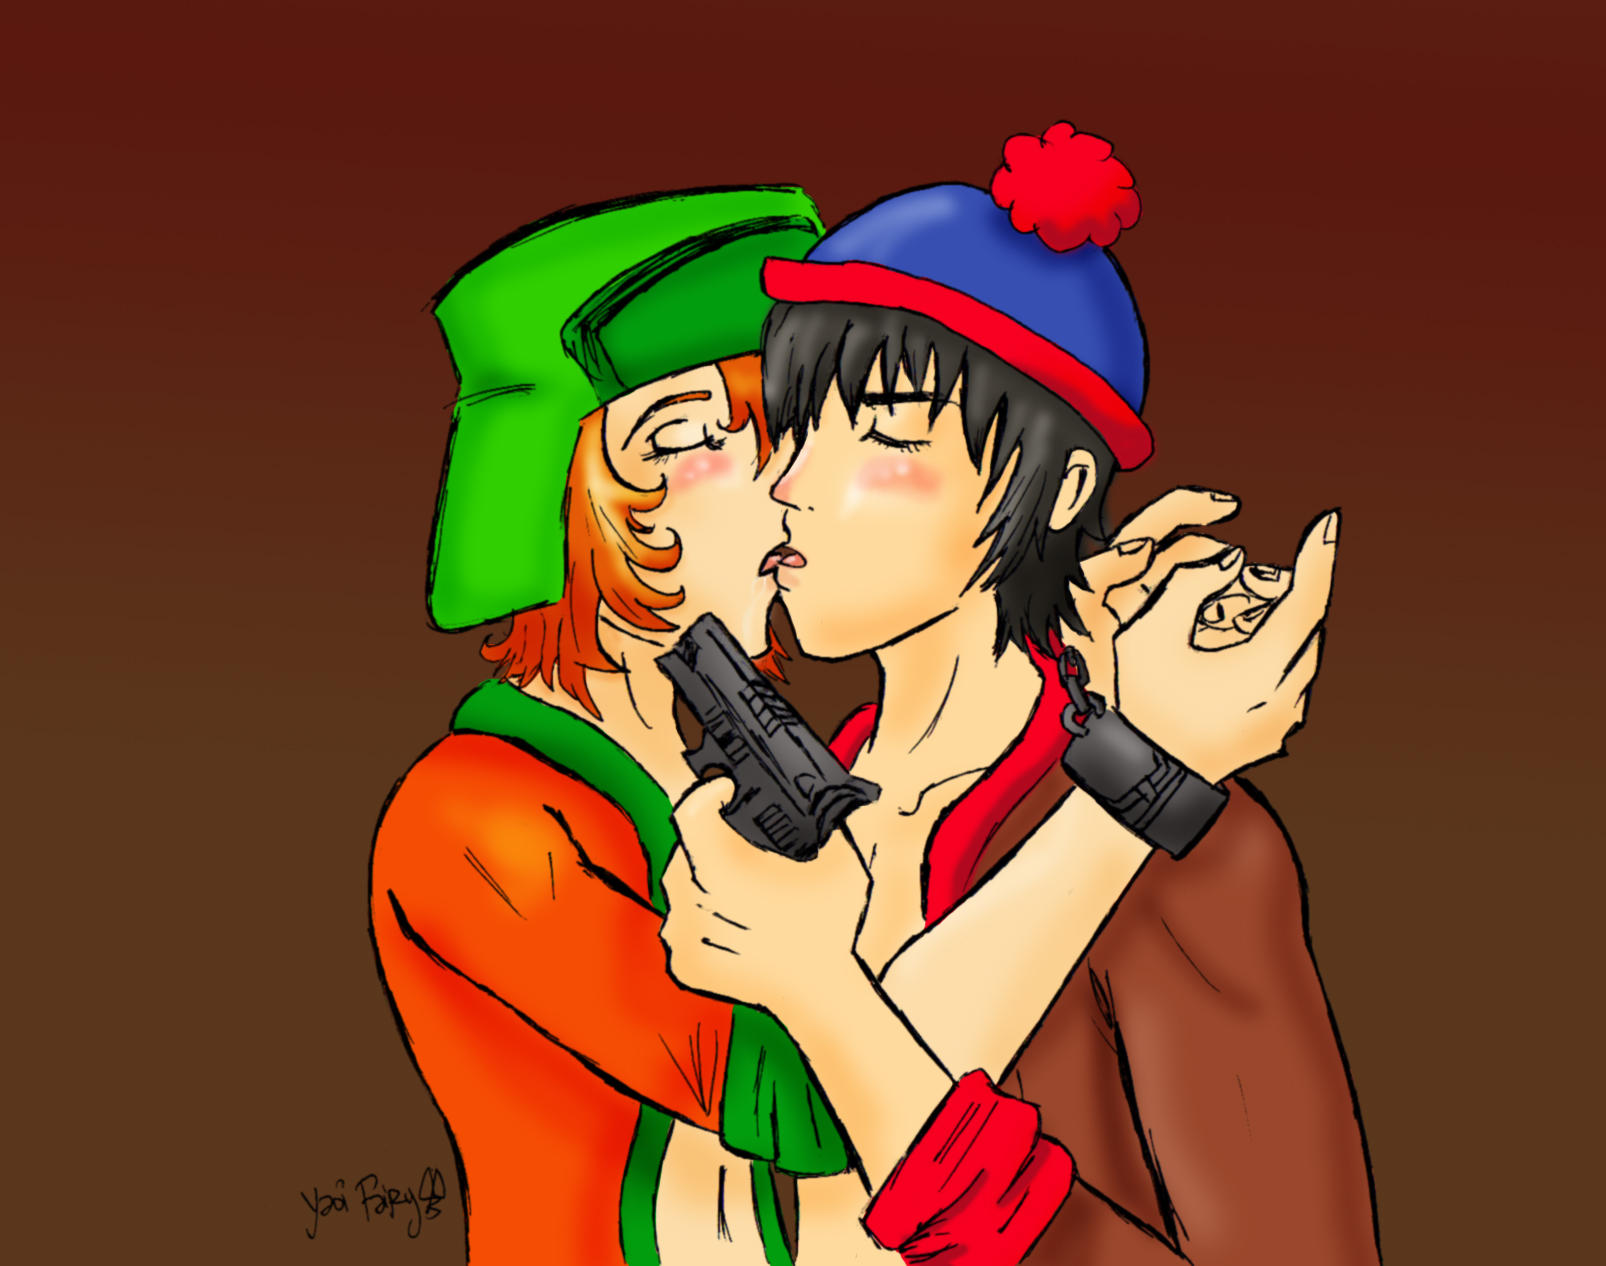 south park stan and kyle fanart south park fanart stan and kyle by.